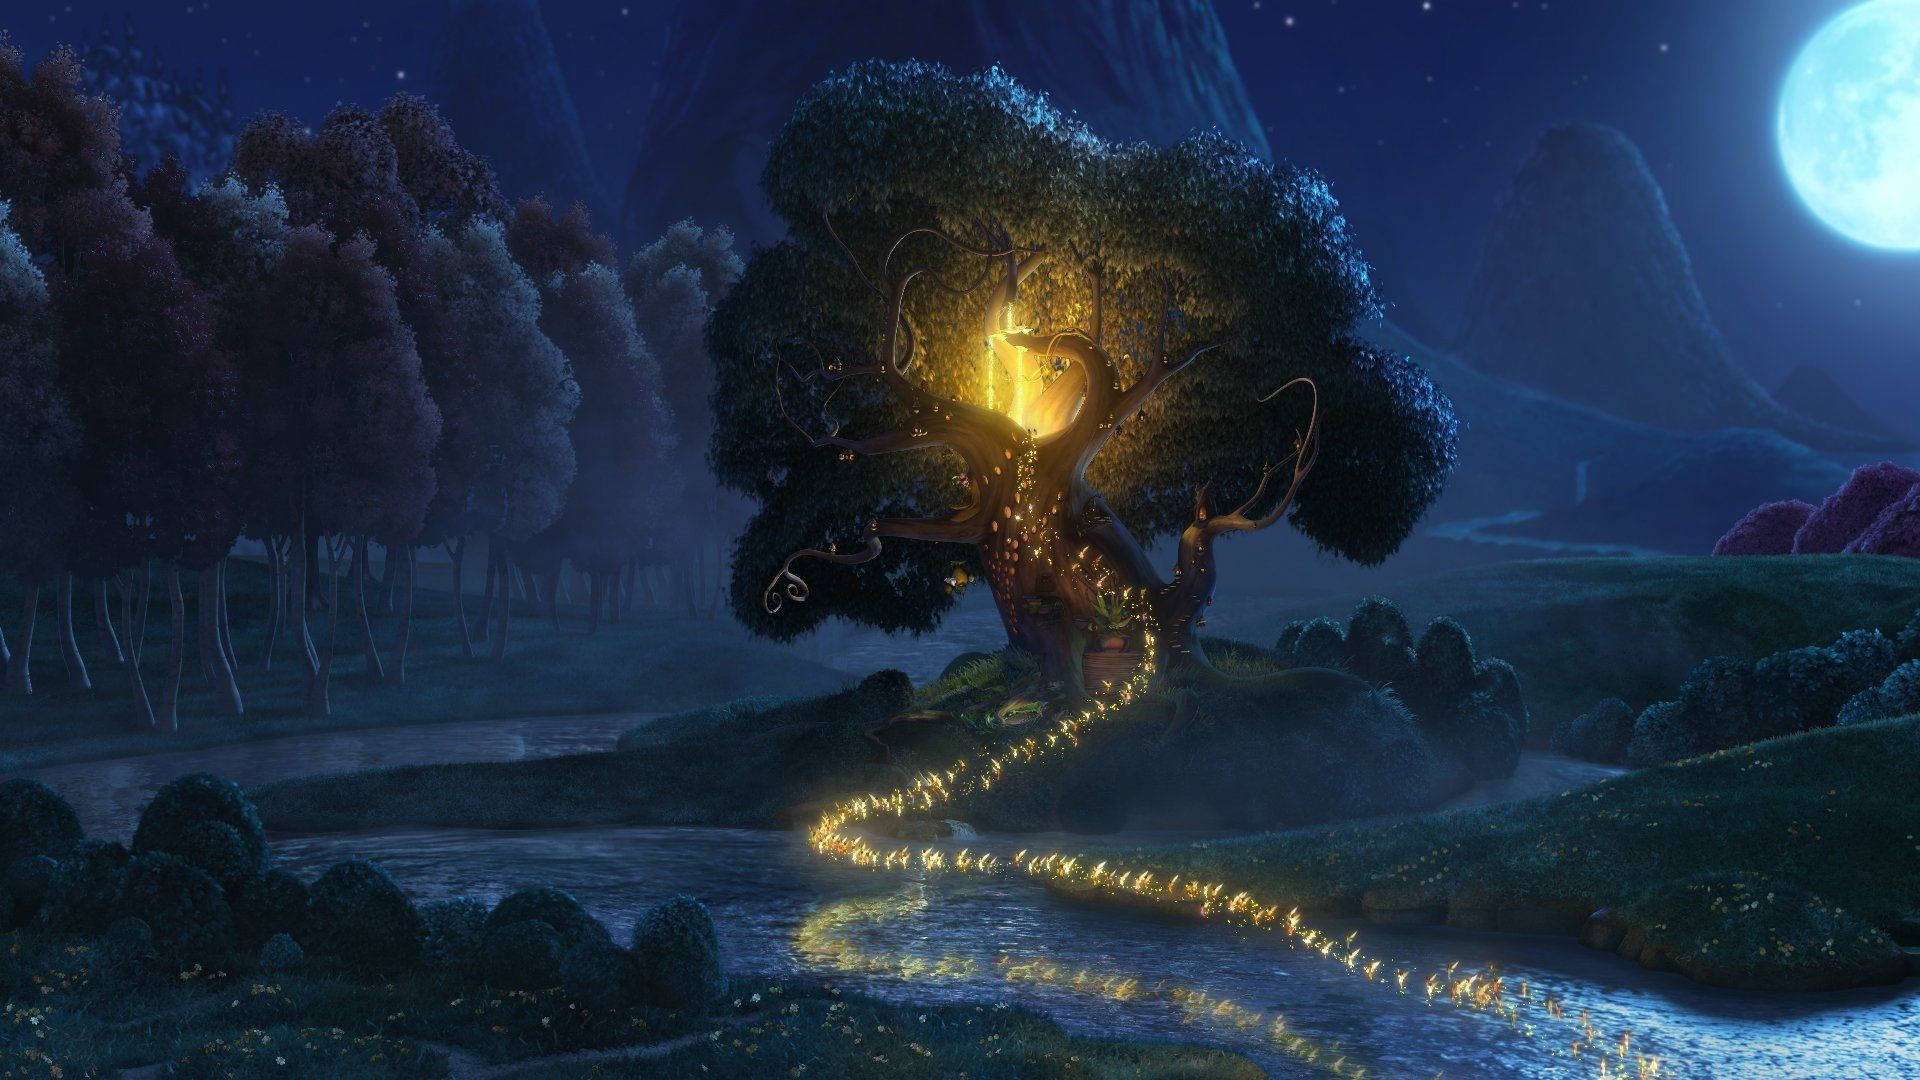 Tinkerbell's Lit Tree Home Background